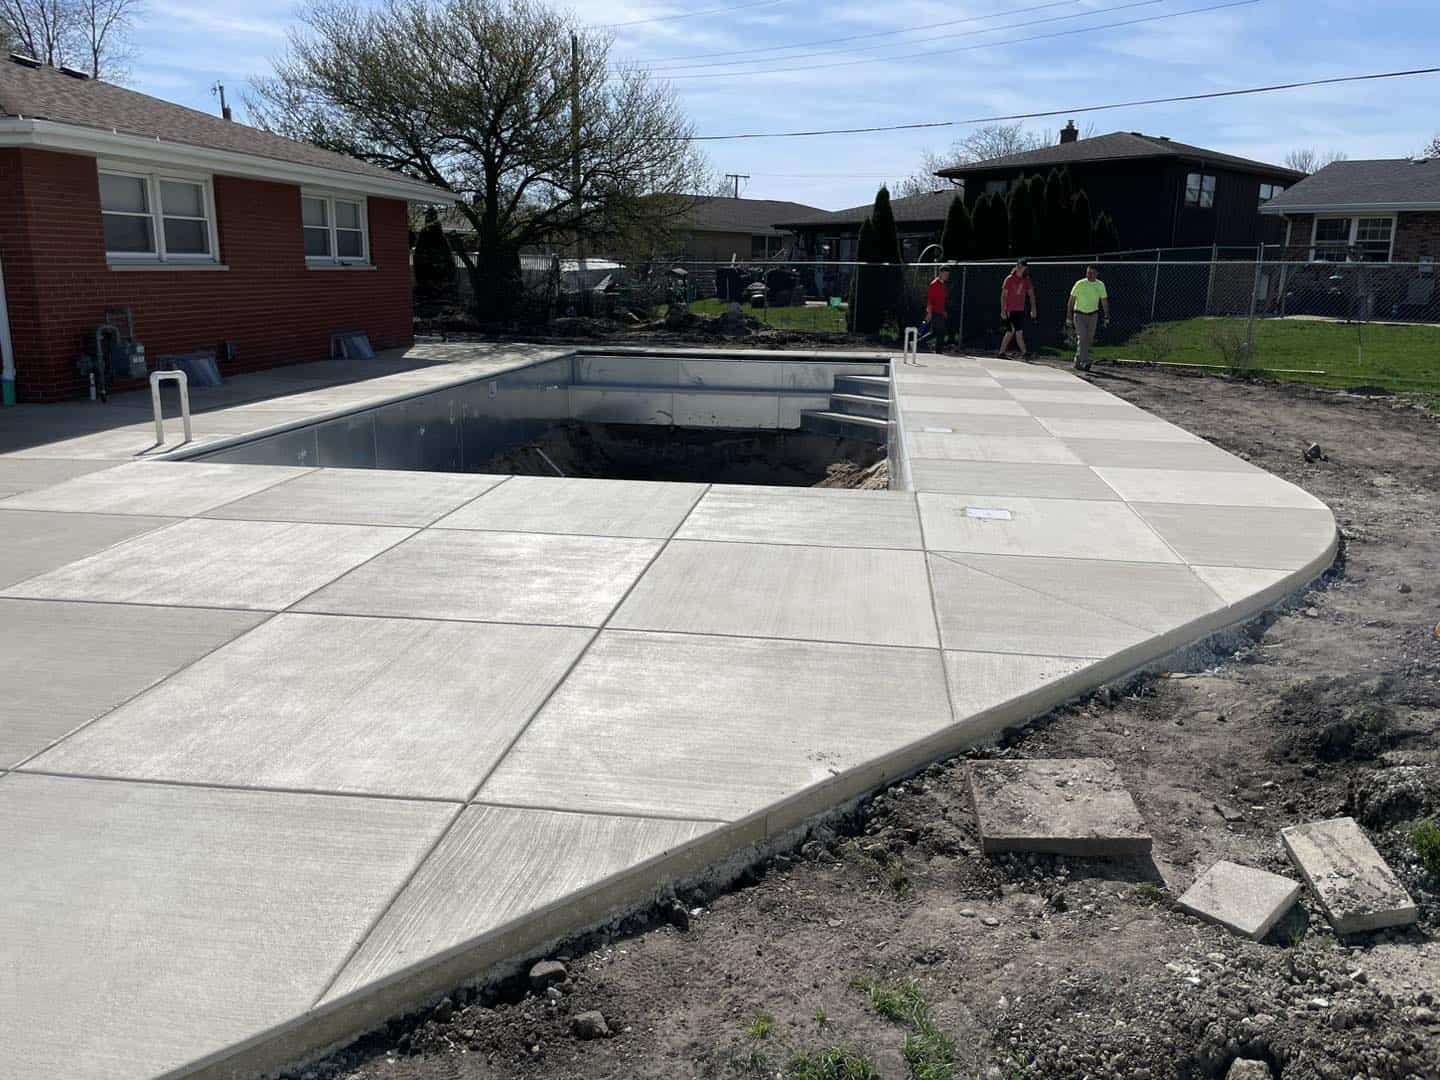 A concrete pool is being built in a backyard.